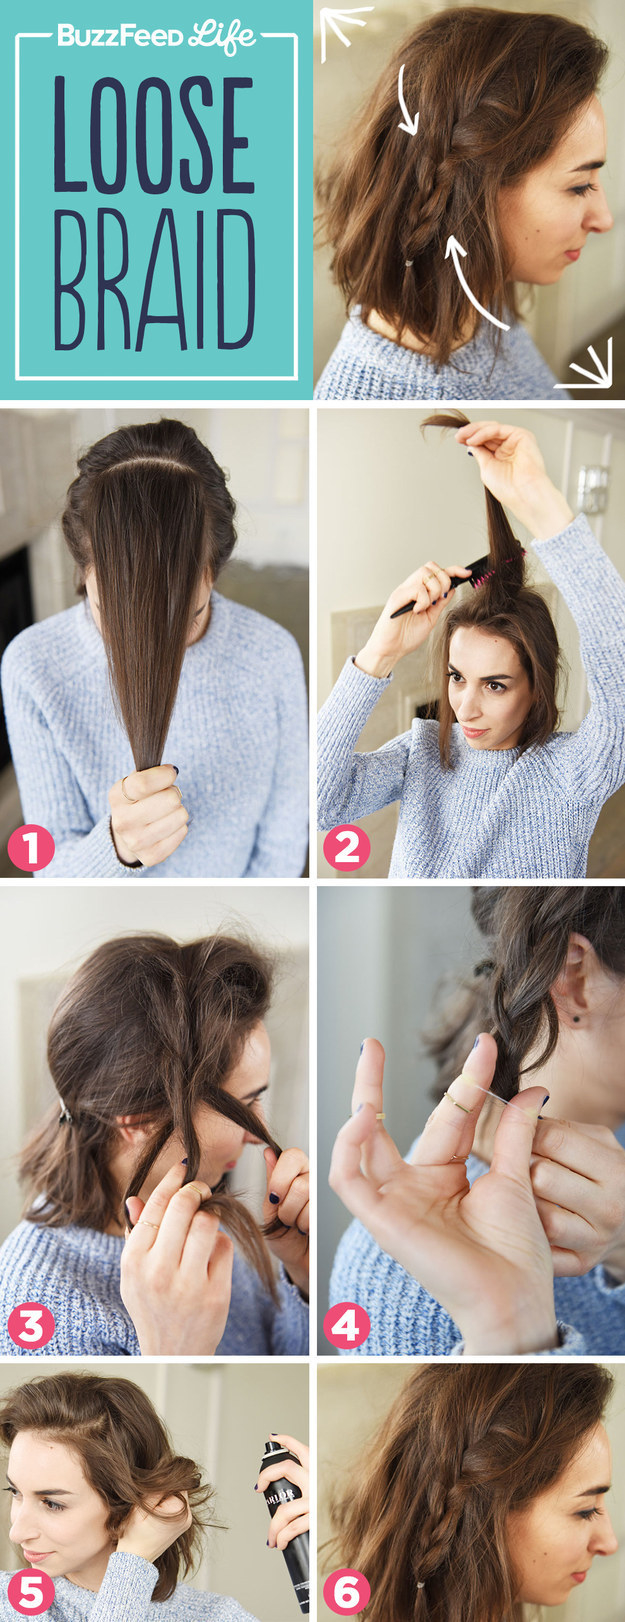 53 Simple Hairstyles for Medium Length Hairstyle - - #hairstyle #Hairstyles  #length #medium #simple | Easy hairstyles, French braid hairstyles,  Hairstyle